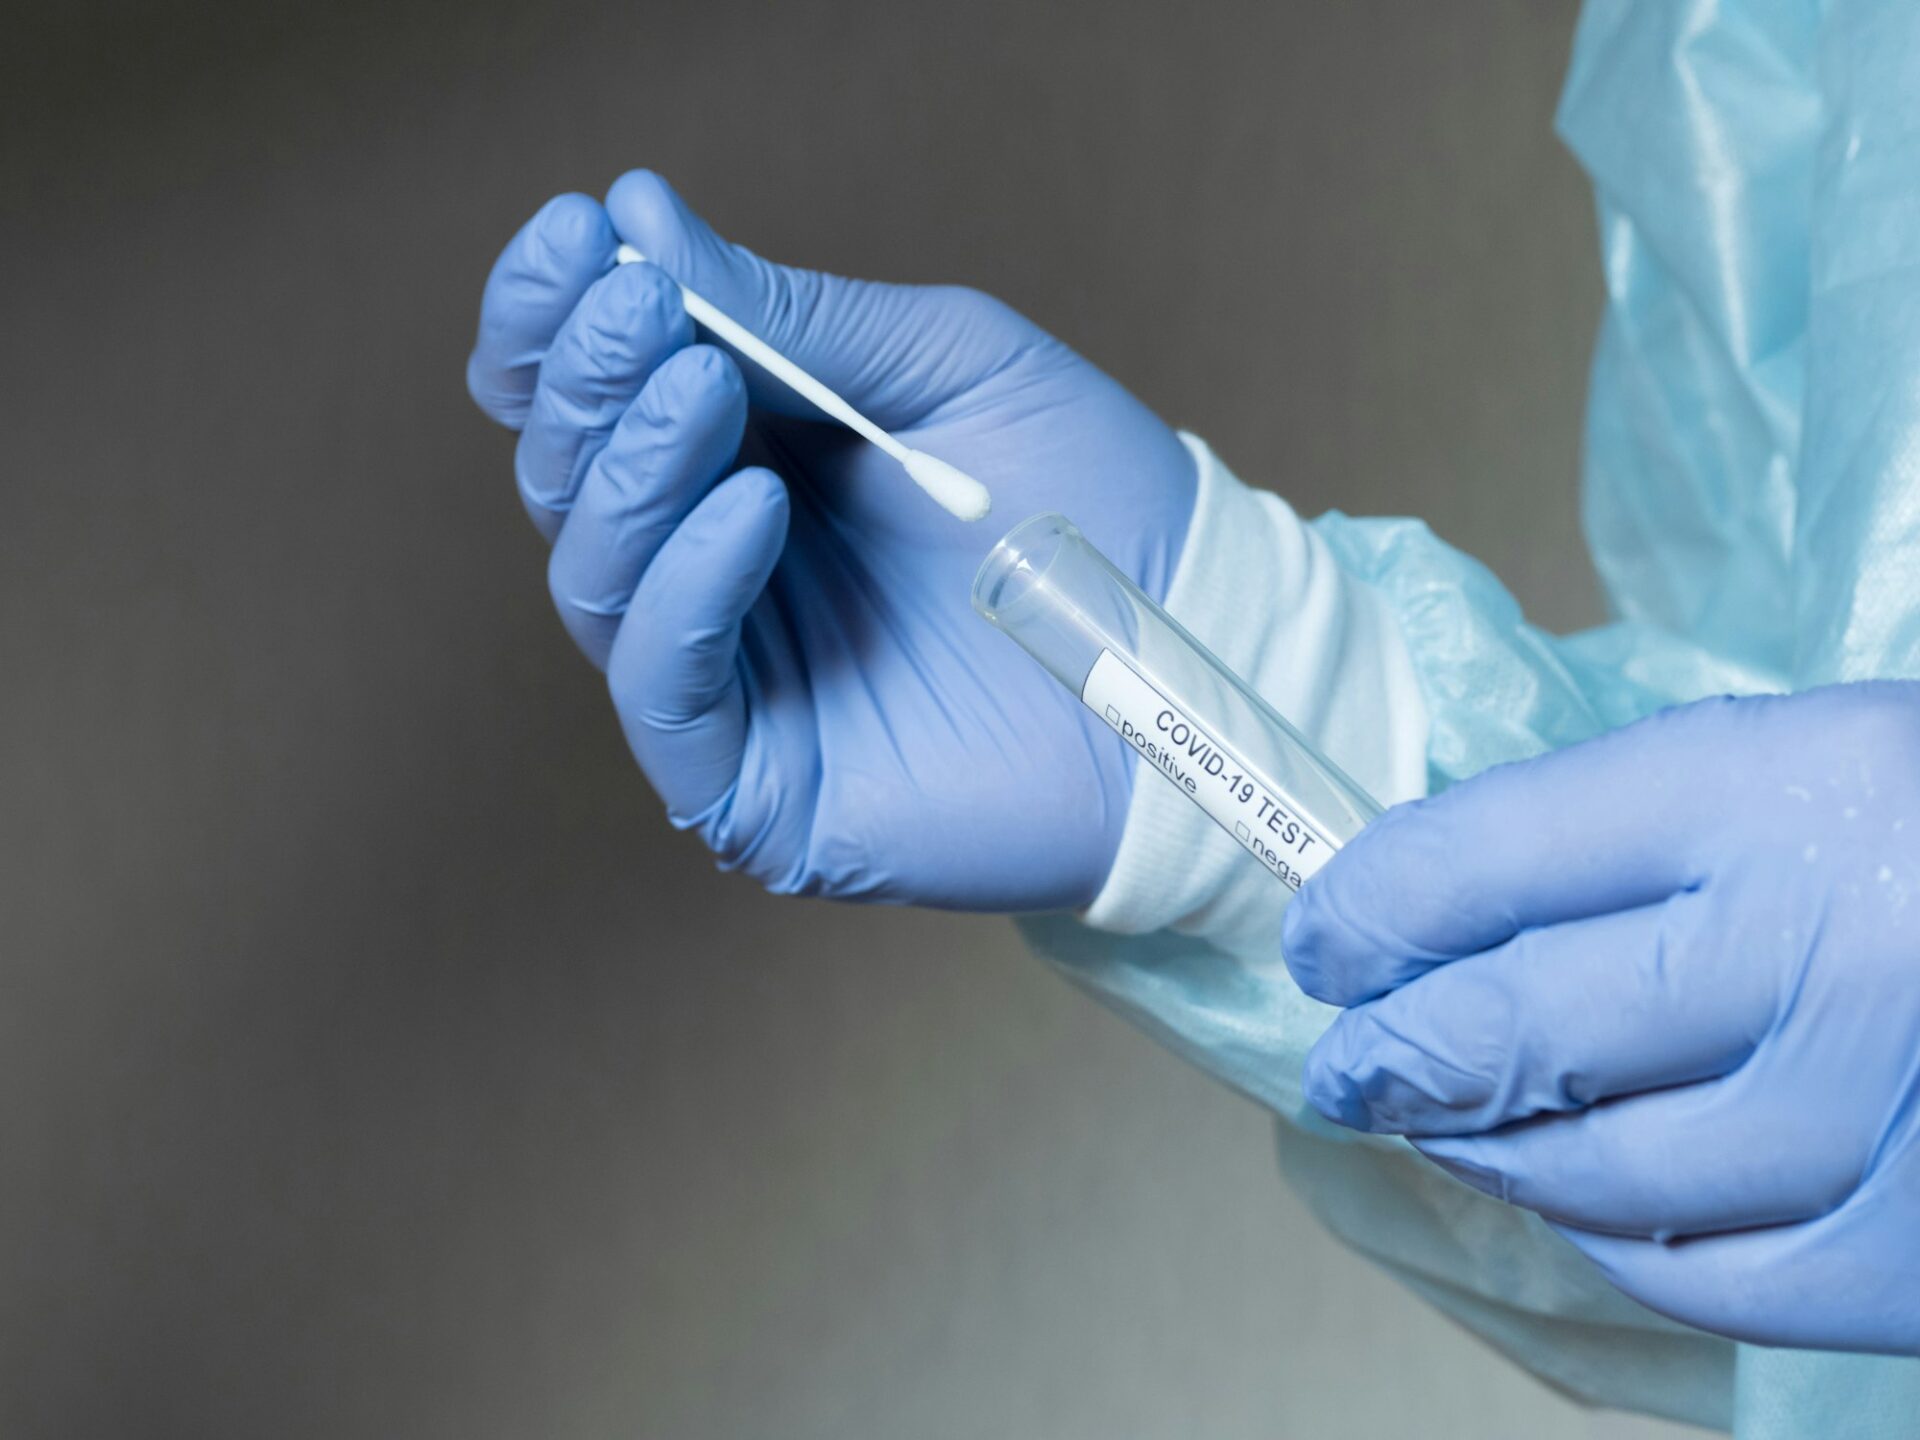 Hands in medical gloves holding an oral sample swab and a test tube for covid test